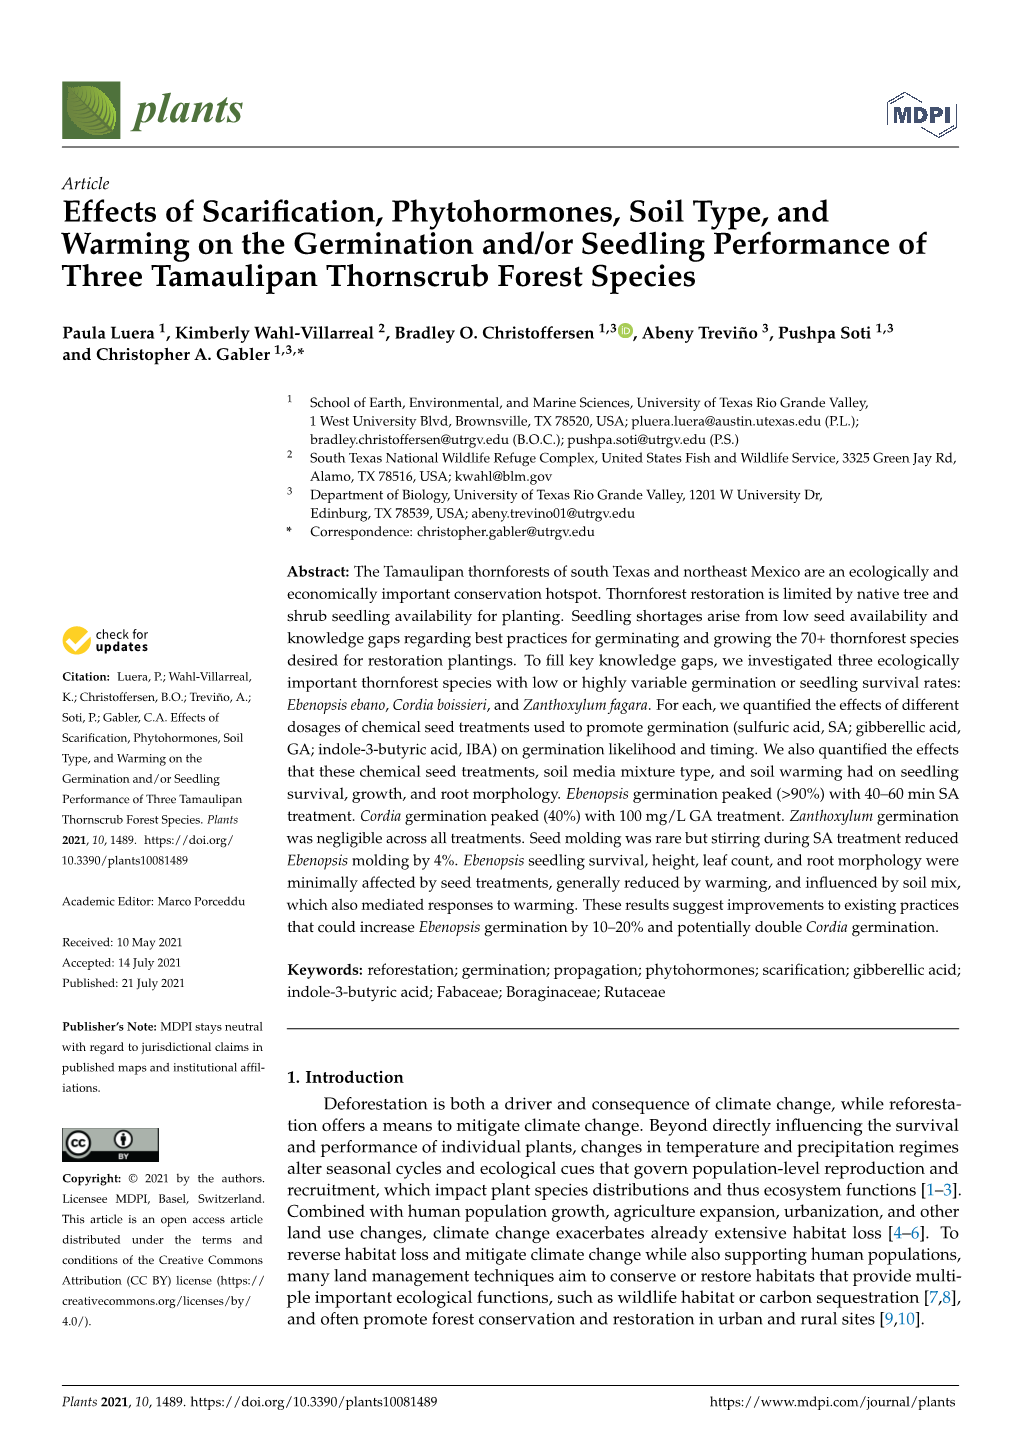 Effects of Scarification, Phytohormones, Soil Type, and Warming on the Germination And/Or Seedling Performance of Three Tamaulip